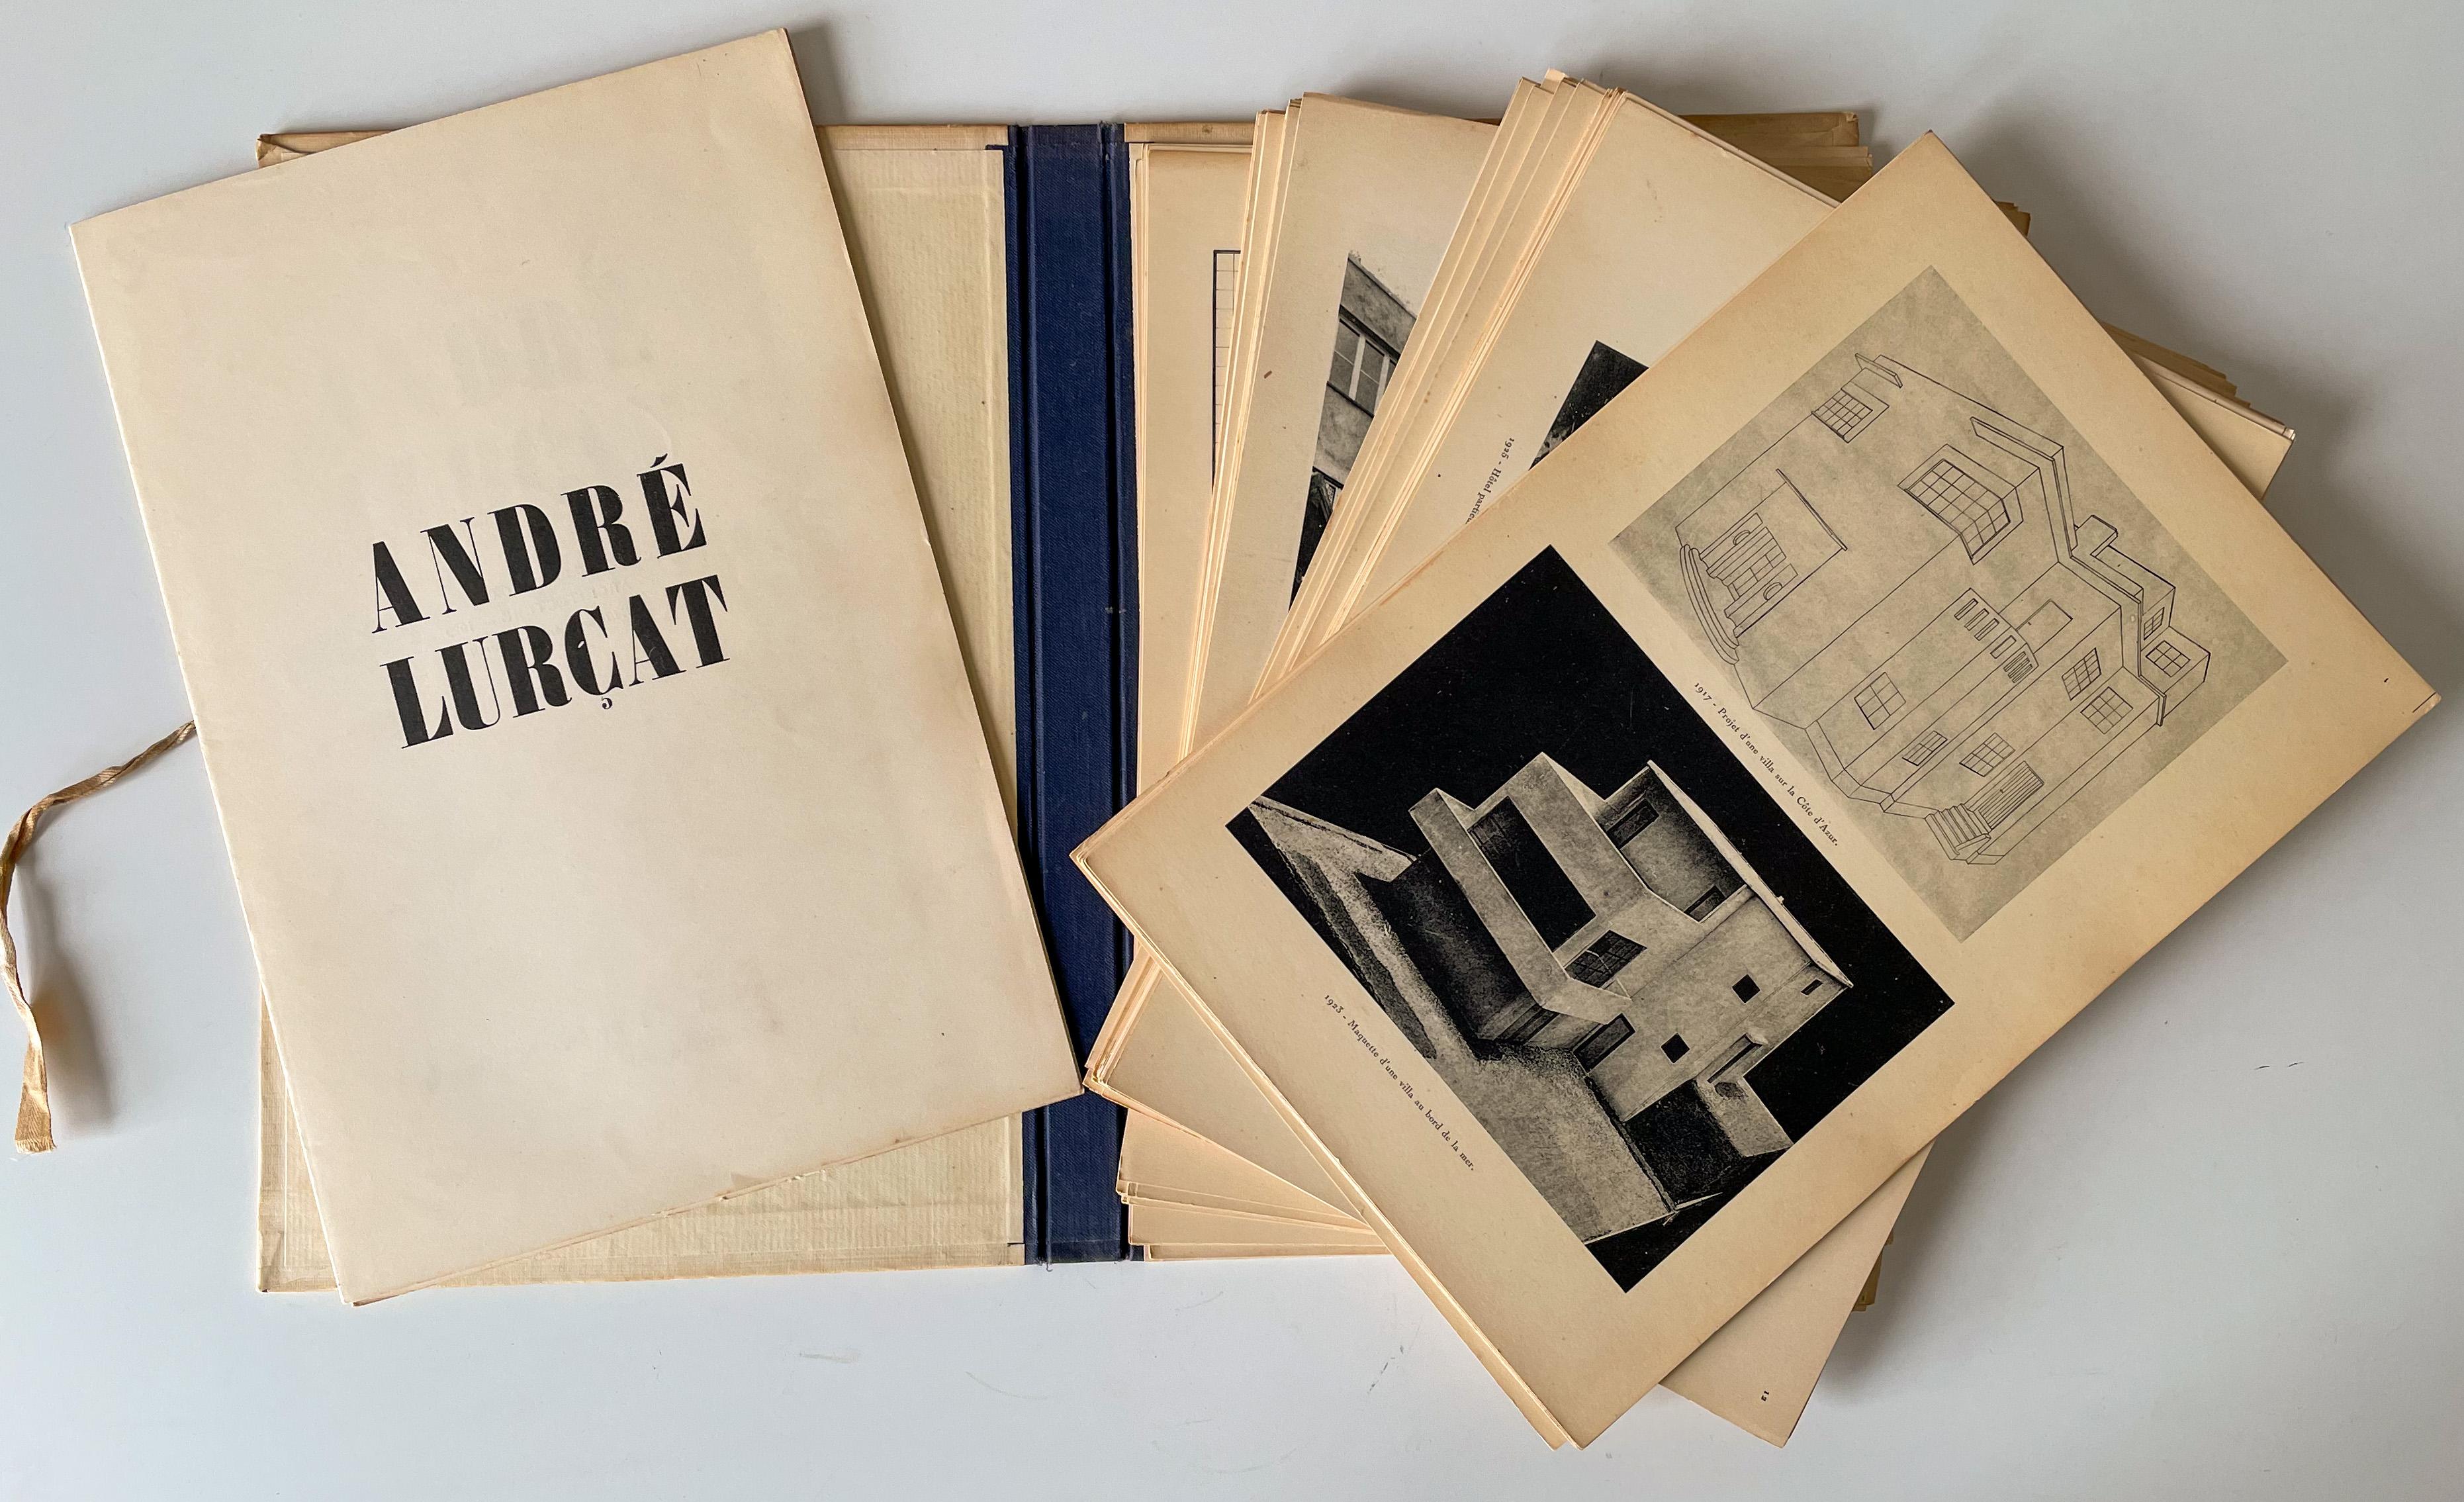 Monograph on the work of Andre Lurcat, important French modernist architect, designer, urban planner, and younger brother of the textile artist Jean. Andre Lurcat played a key role in the reconstruction of French cities after WWII, and contributed